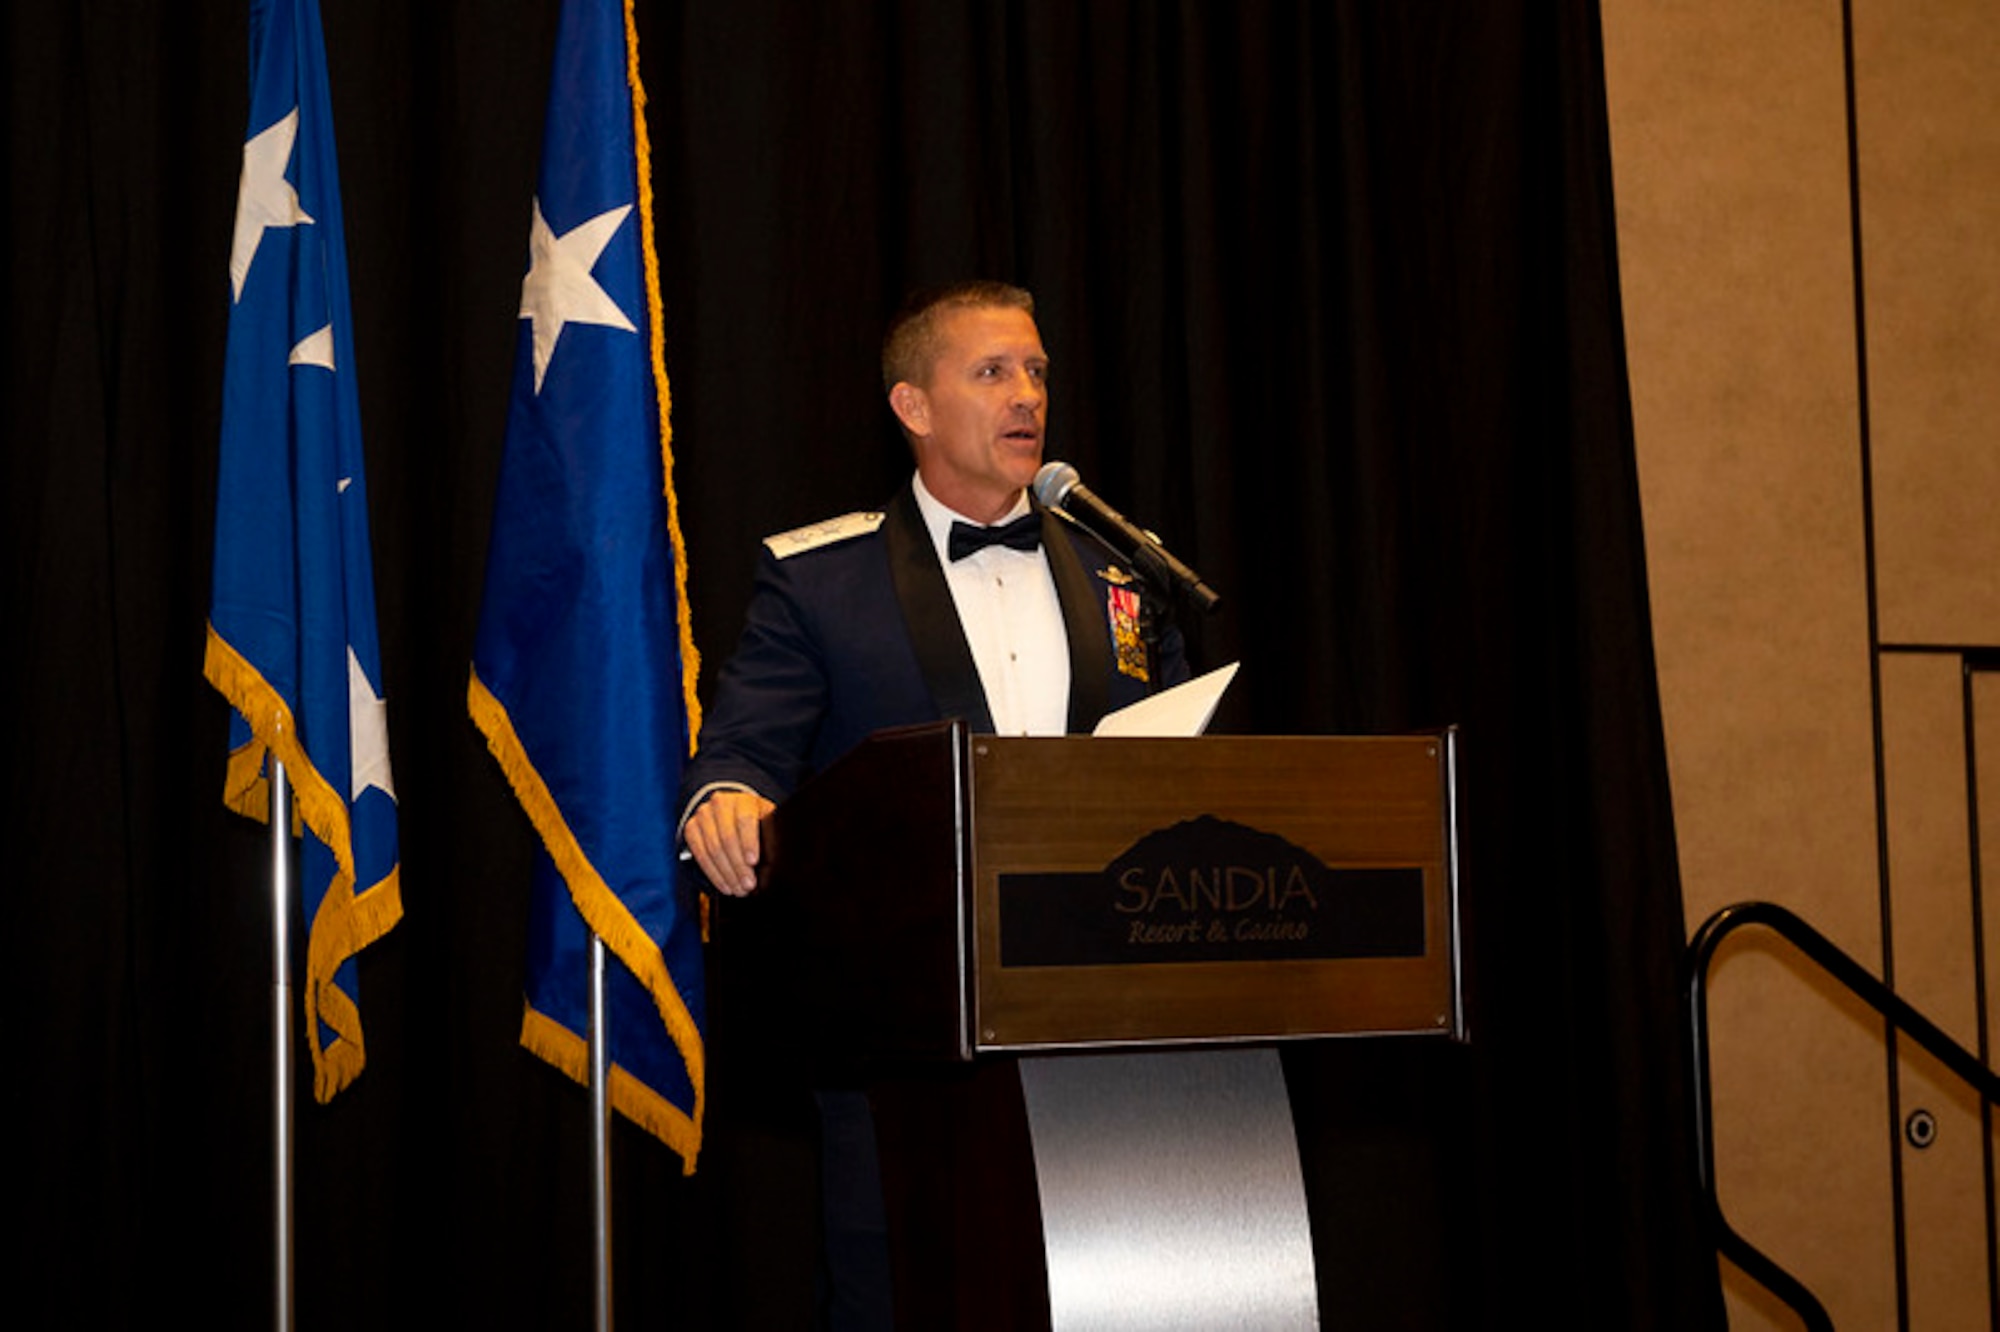 Maj. Gen. Trey Rawls, Air Force Operational Test and Evaluation Center Commander, addresses attendees at the AFOTEC 50th Anniversary Celebration held at the Sandia Resort in Albuquerque, N.M., on March 6, 2024 that brought together current and former AFOTEC members, past AFOTEC commanders, Kirtland AFB leaders, and New Mexico military and community leaders to celebrate 50 years of operational testing excellence.